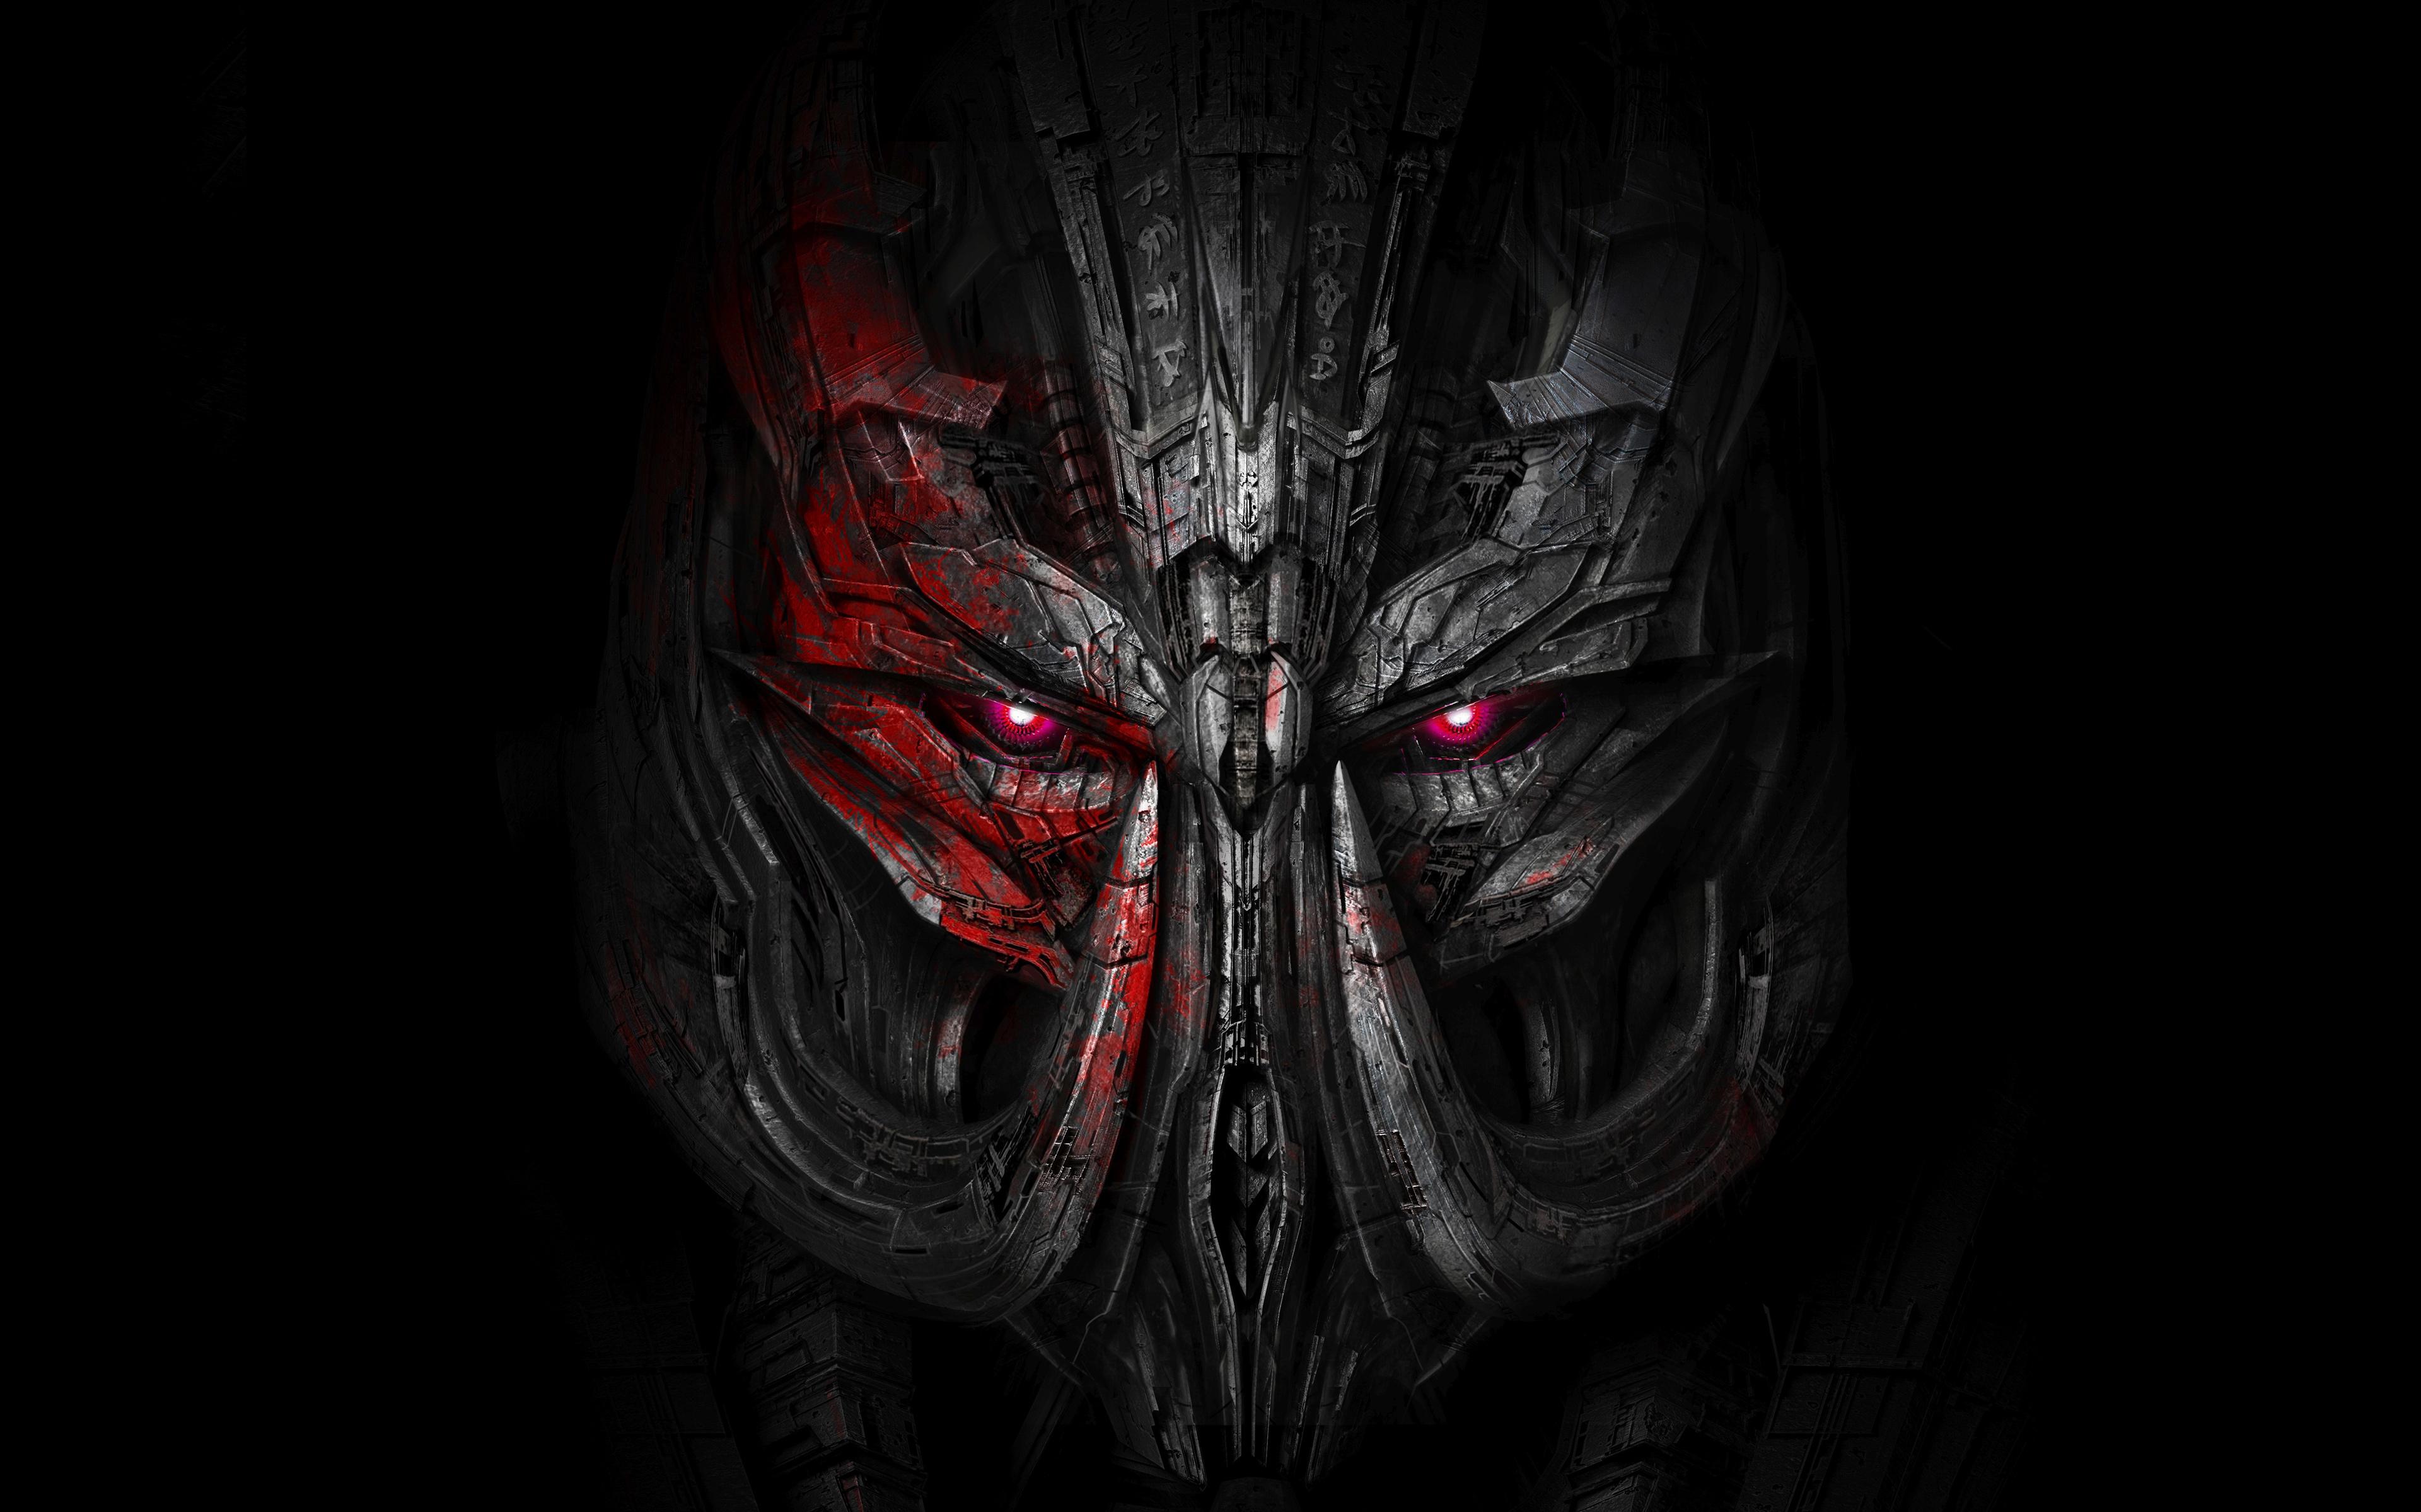 Give an argument for why Megatron would win rdeathbattle